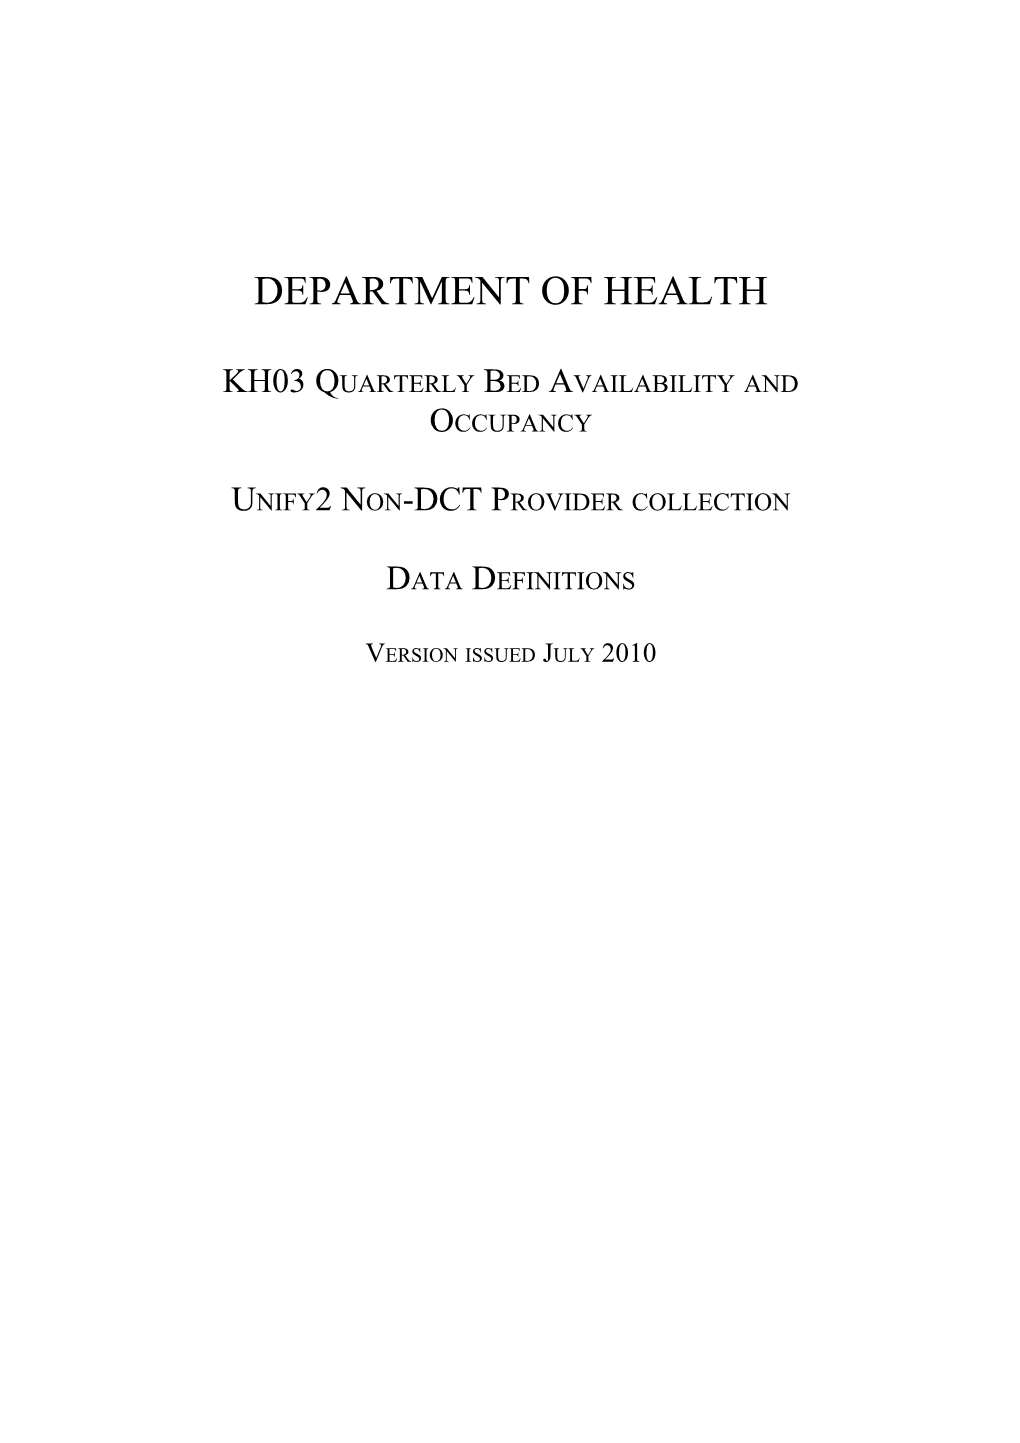 Proposed Changes to Department of Health Beds Data Collections